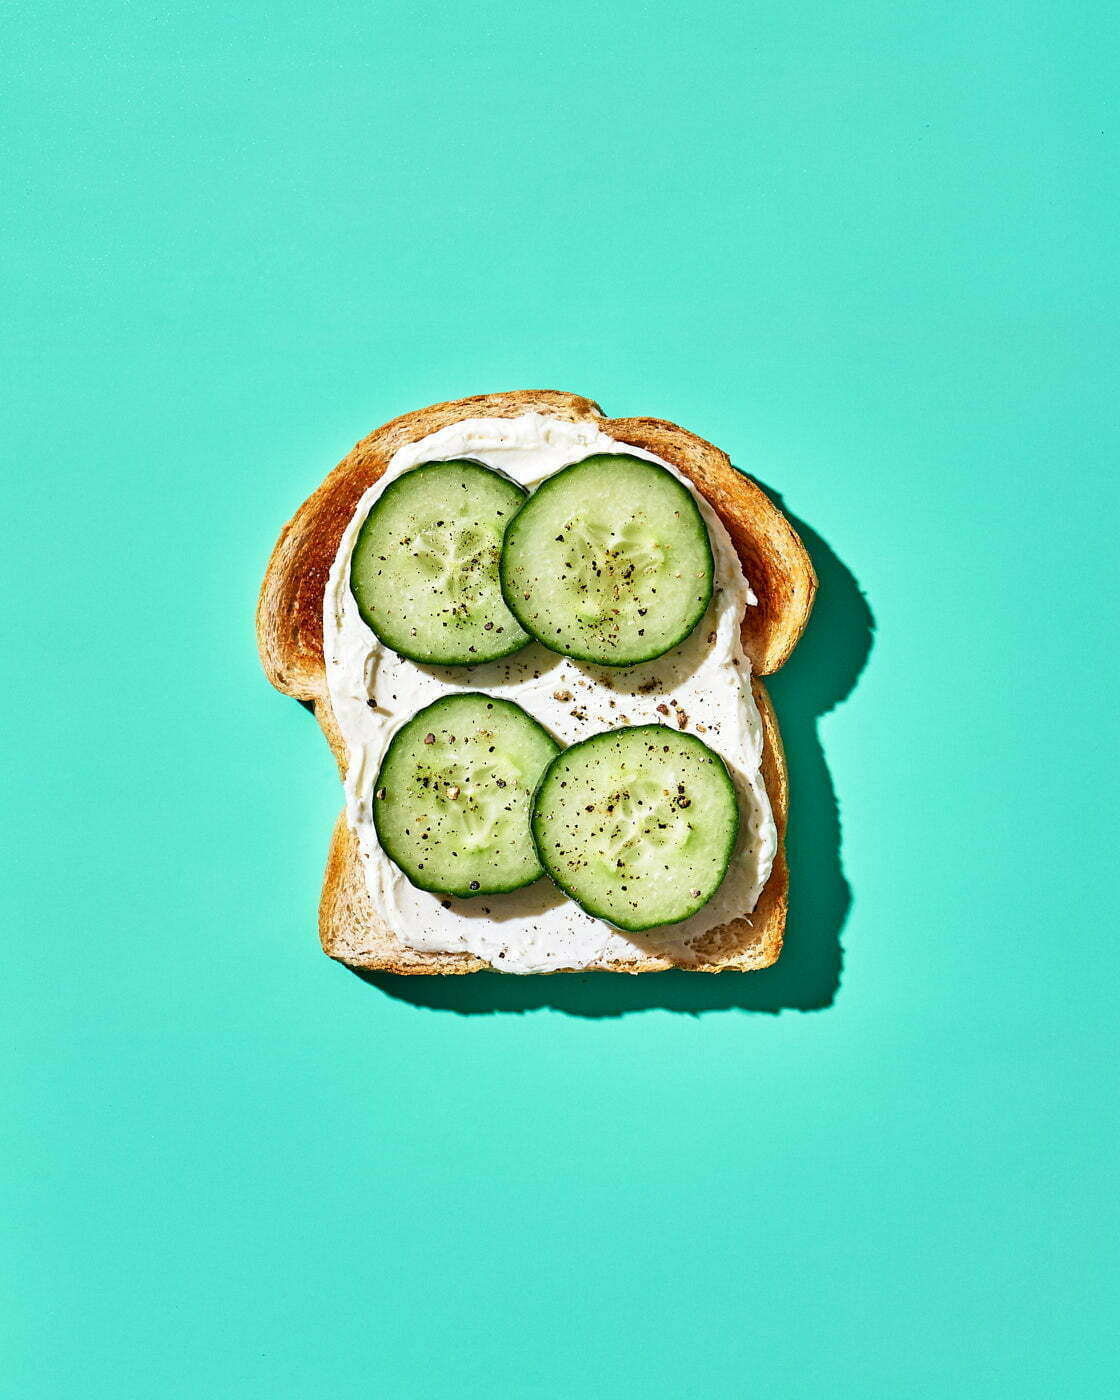 A single slice of sourdough bread topped with cream cheese, cucumbers, and freshly ground black pepper on a teal background.